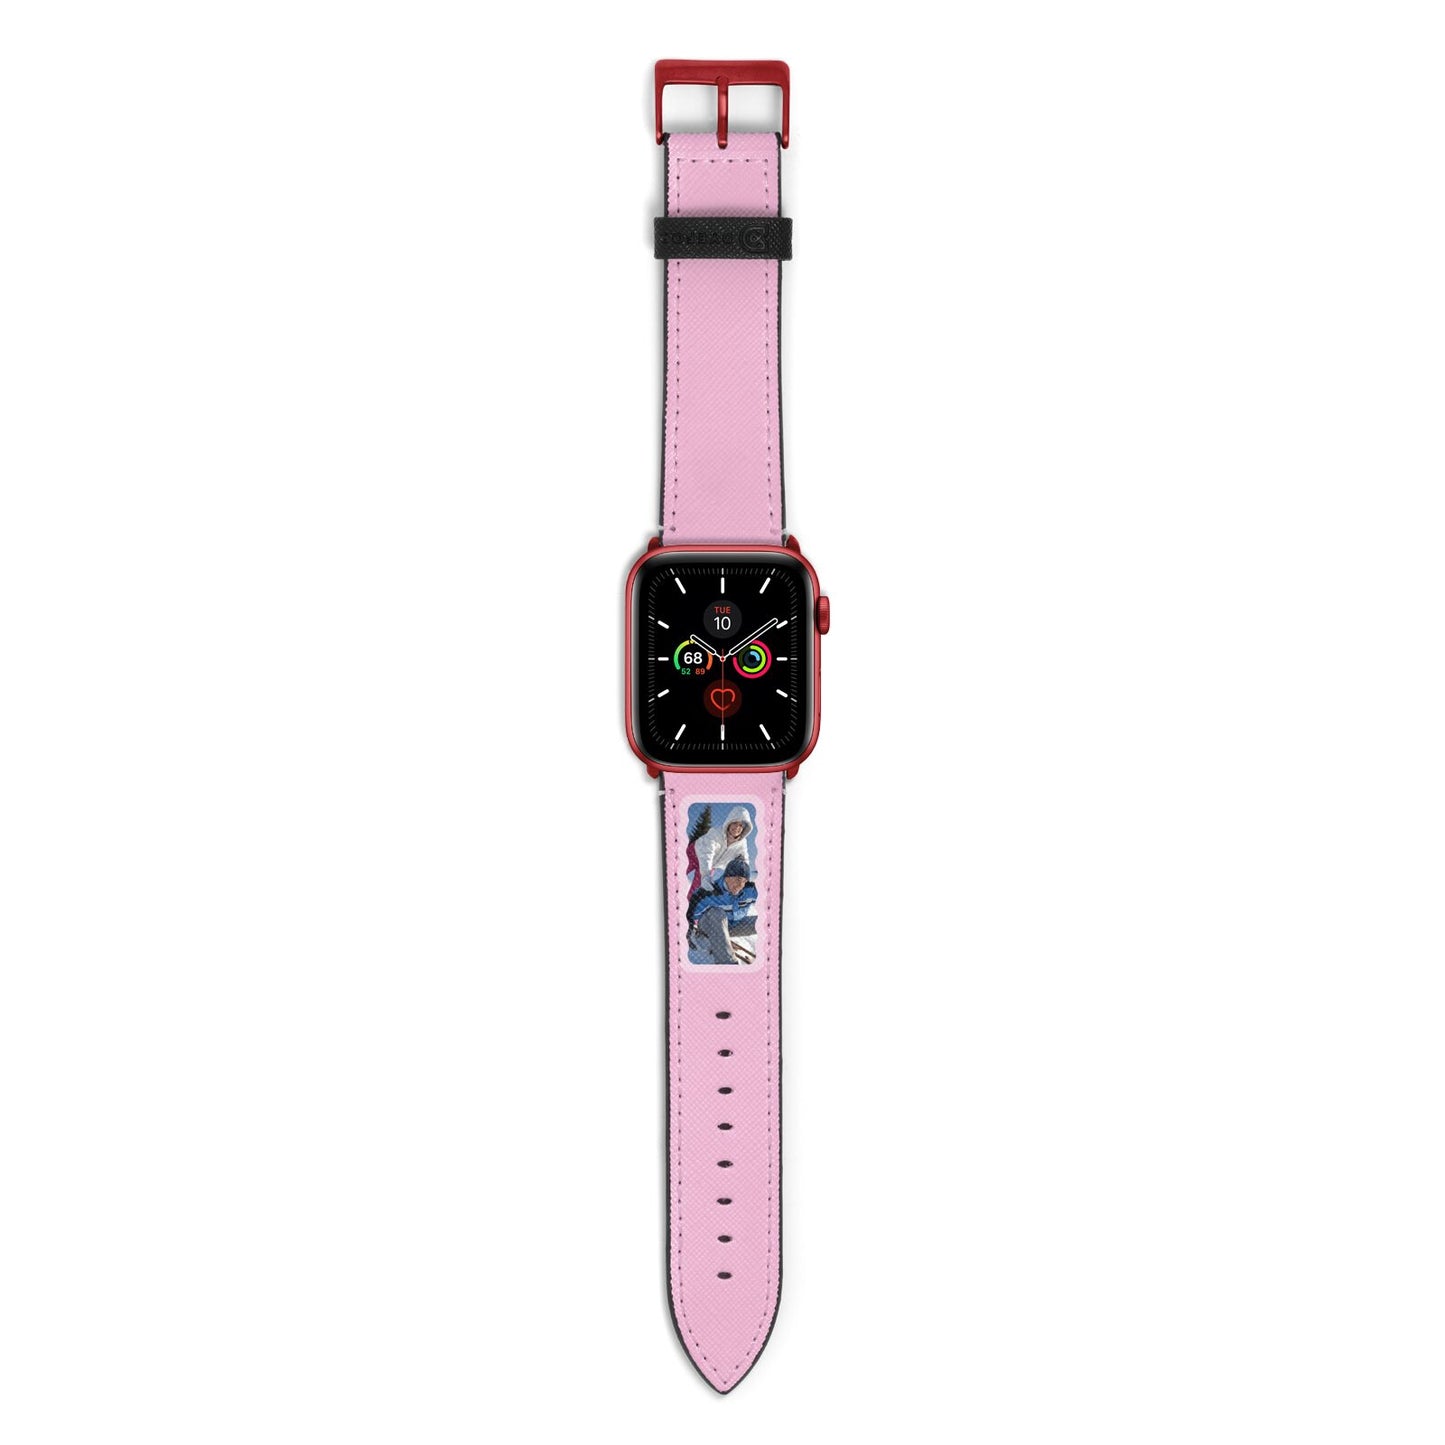 Wavy Photo Border Apple Watch Strap with Red Hardware